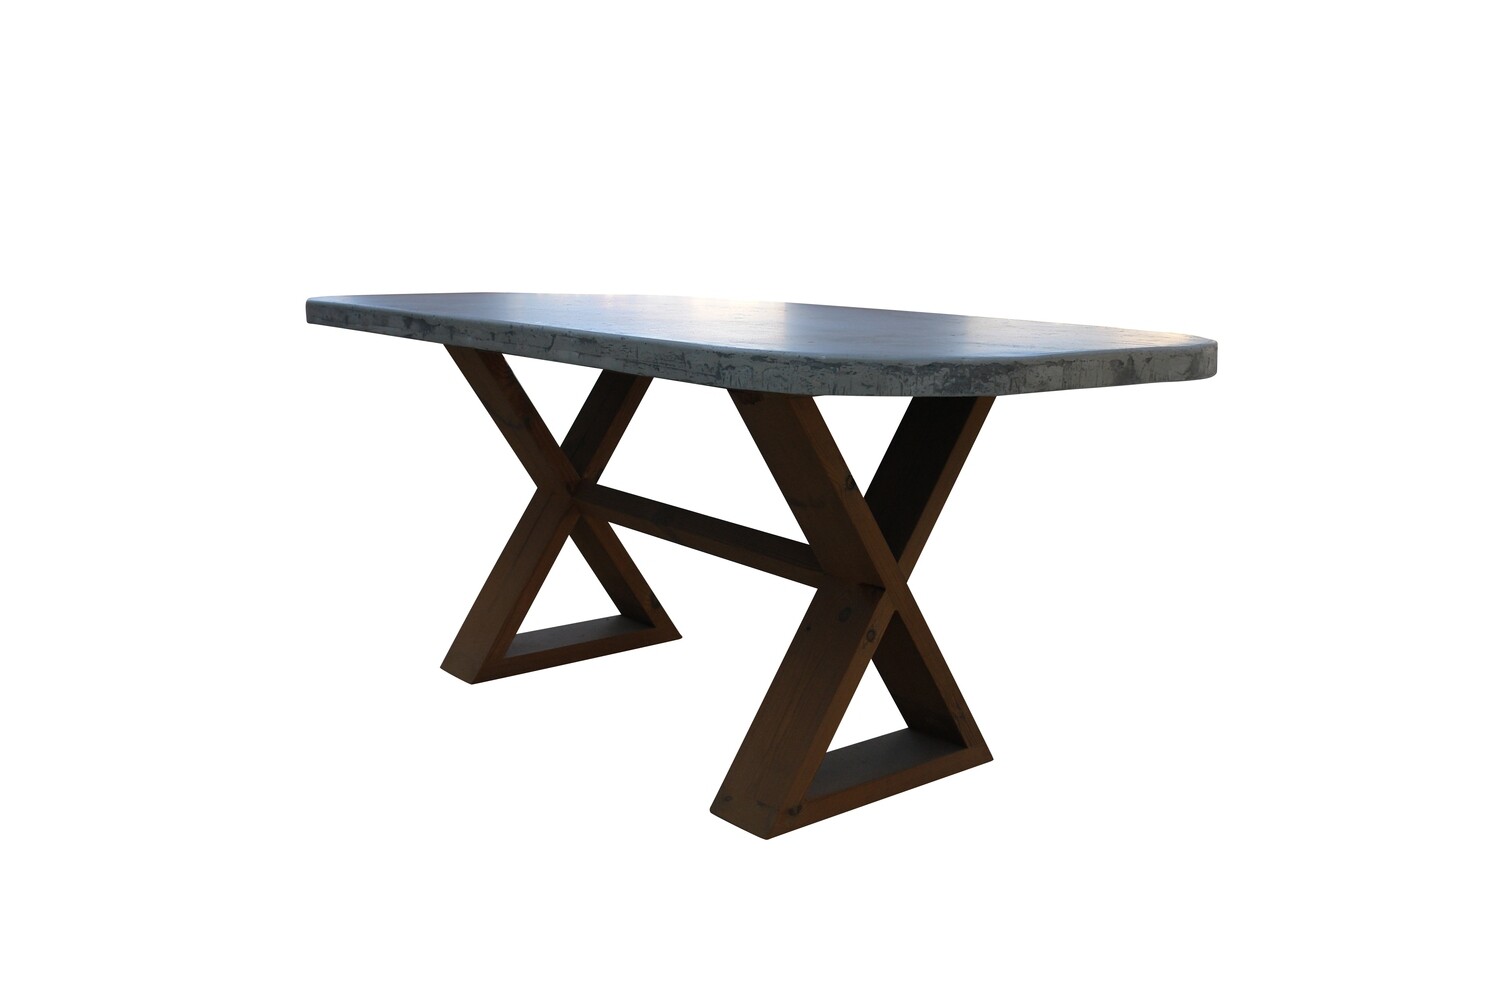 6' Concrete Dining Table